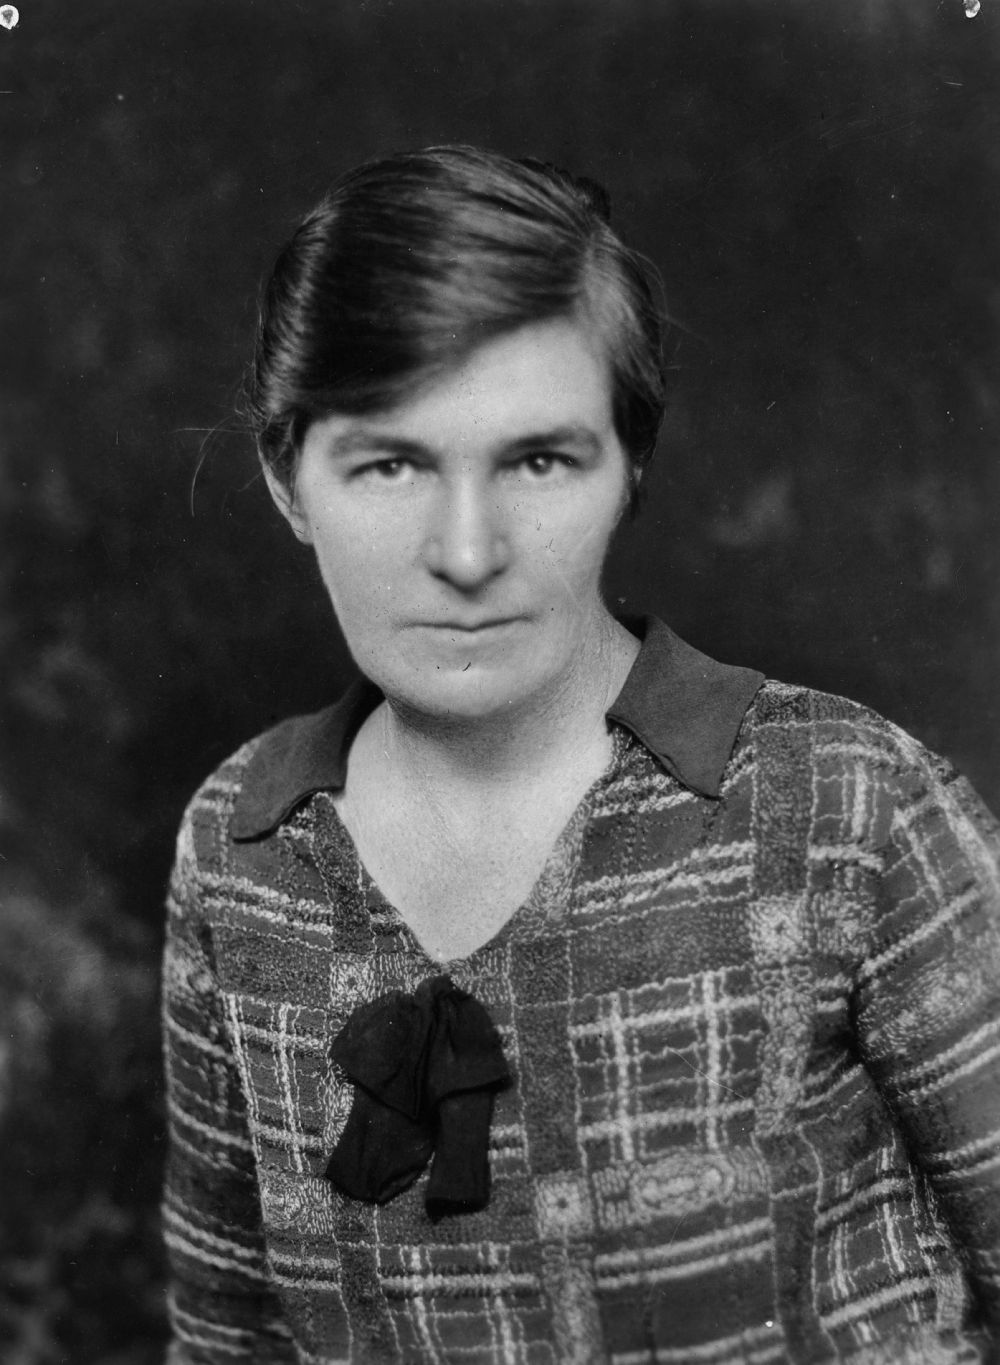 Image of Nettie Palmer (photo by John Oxley Library, State Library of Queensland)